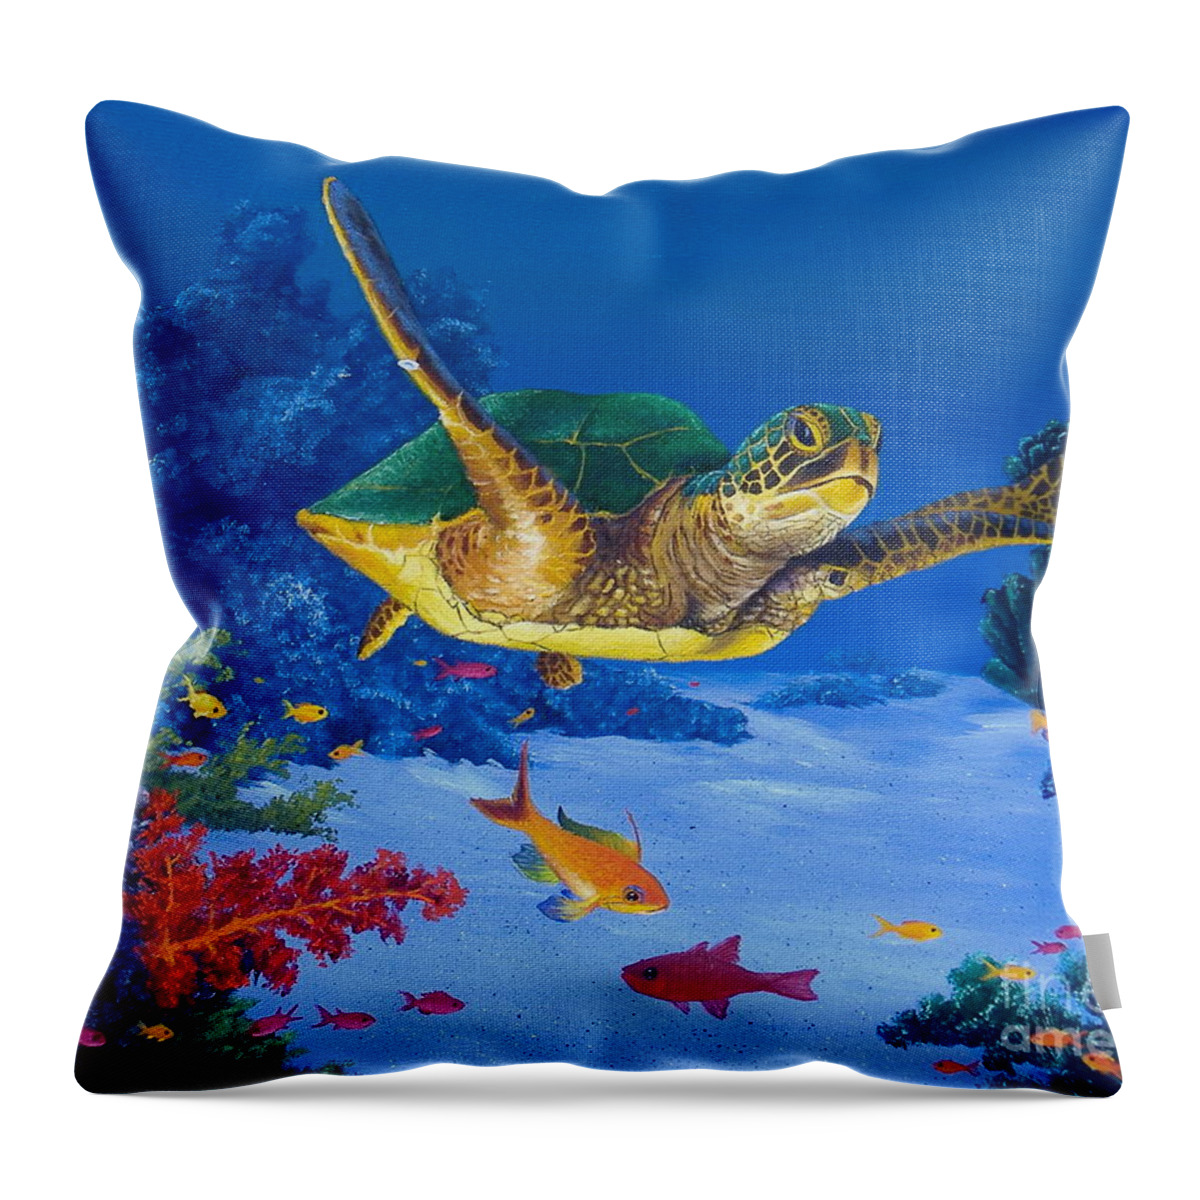 Sea Turtle Images Throw Pillow featuring the painting Greenback Cruising by Michael Allen